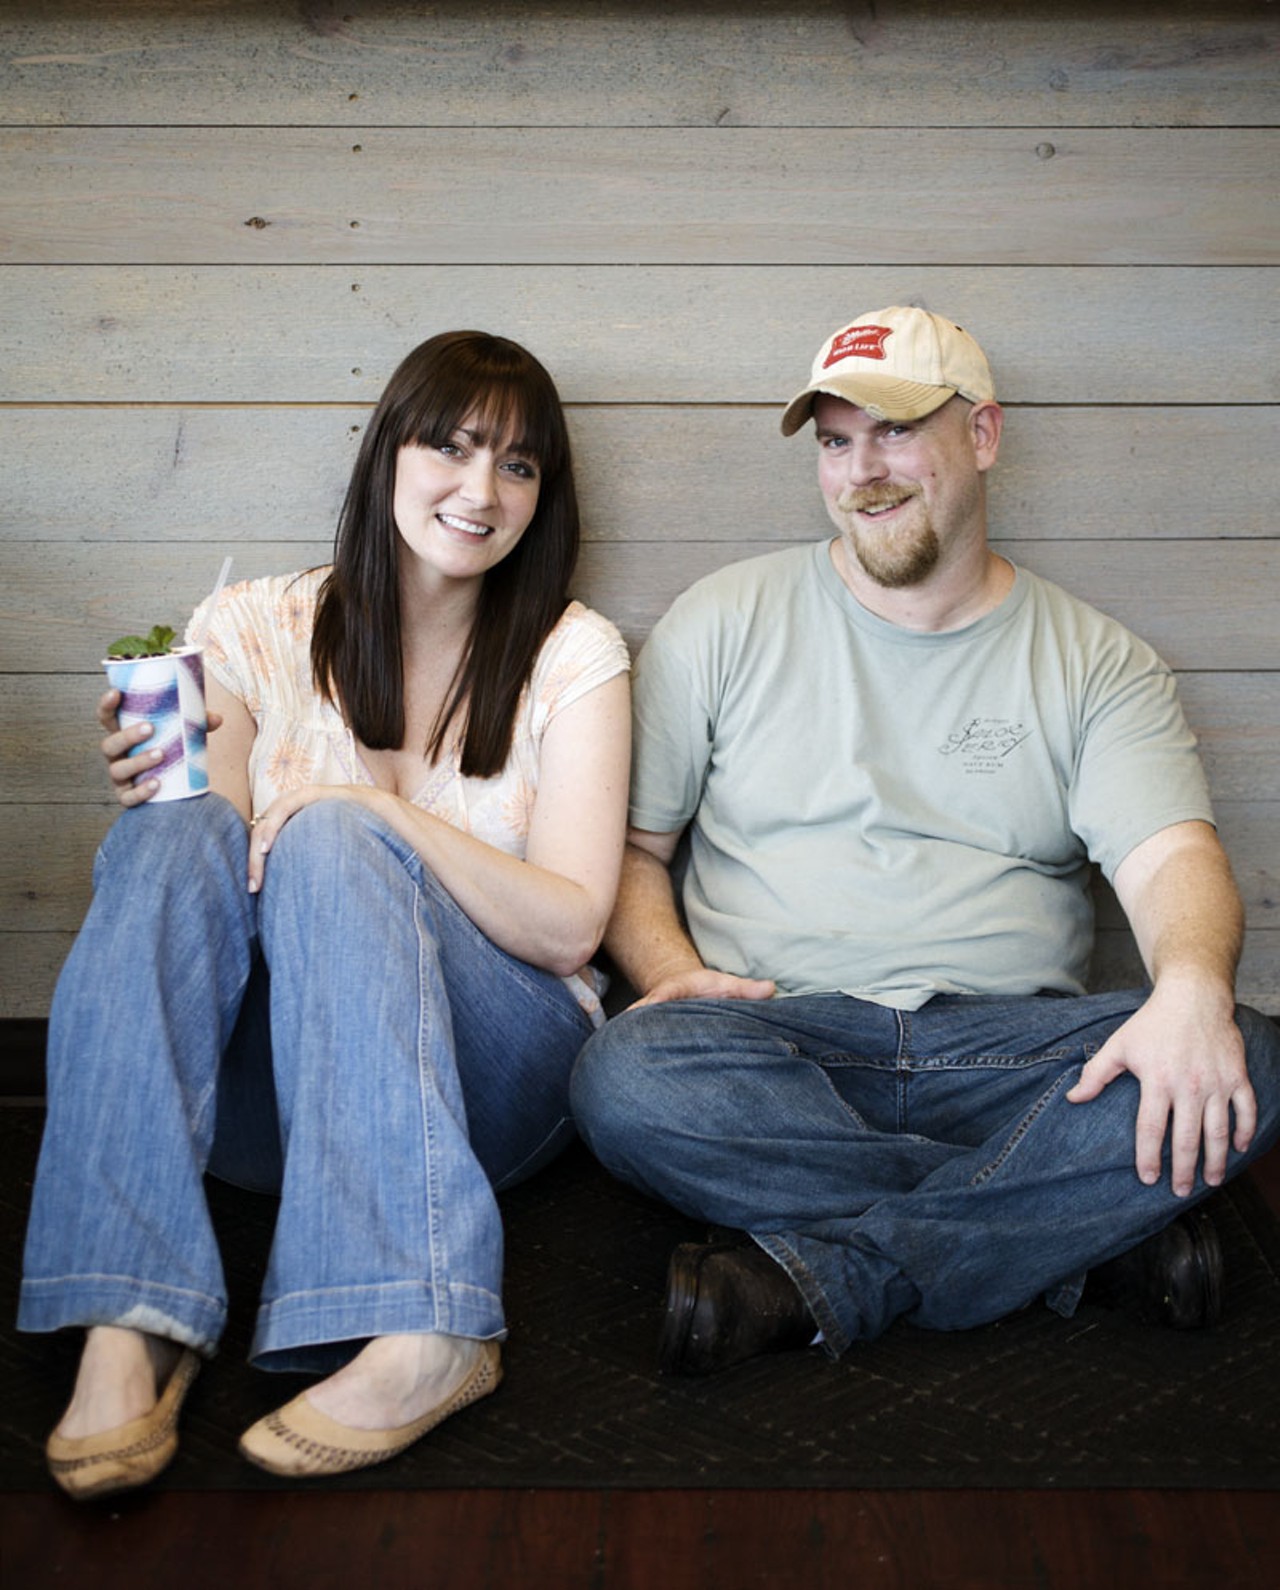 Owners Jessica Smith and Mark Lucas opened Fozzie's in June of this year.